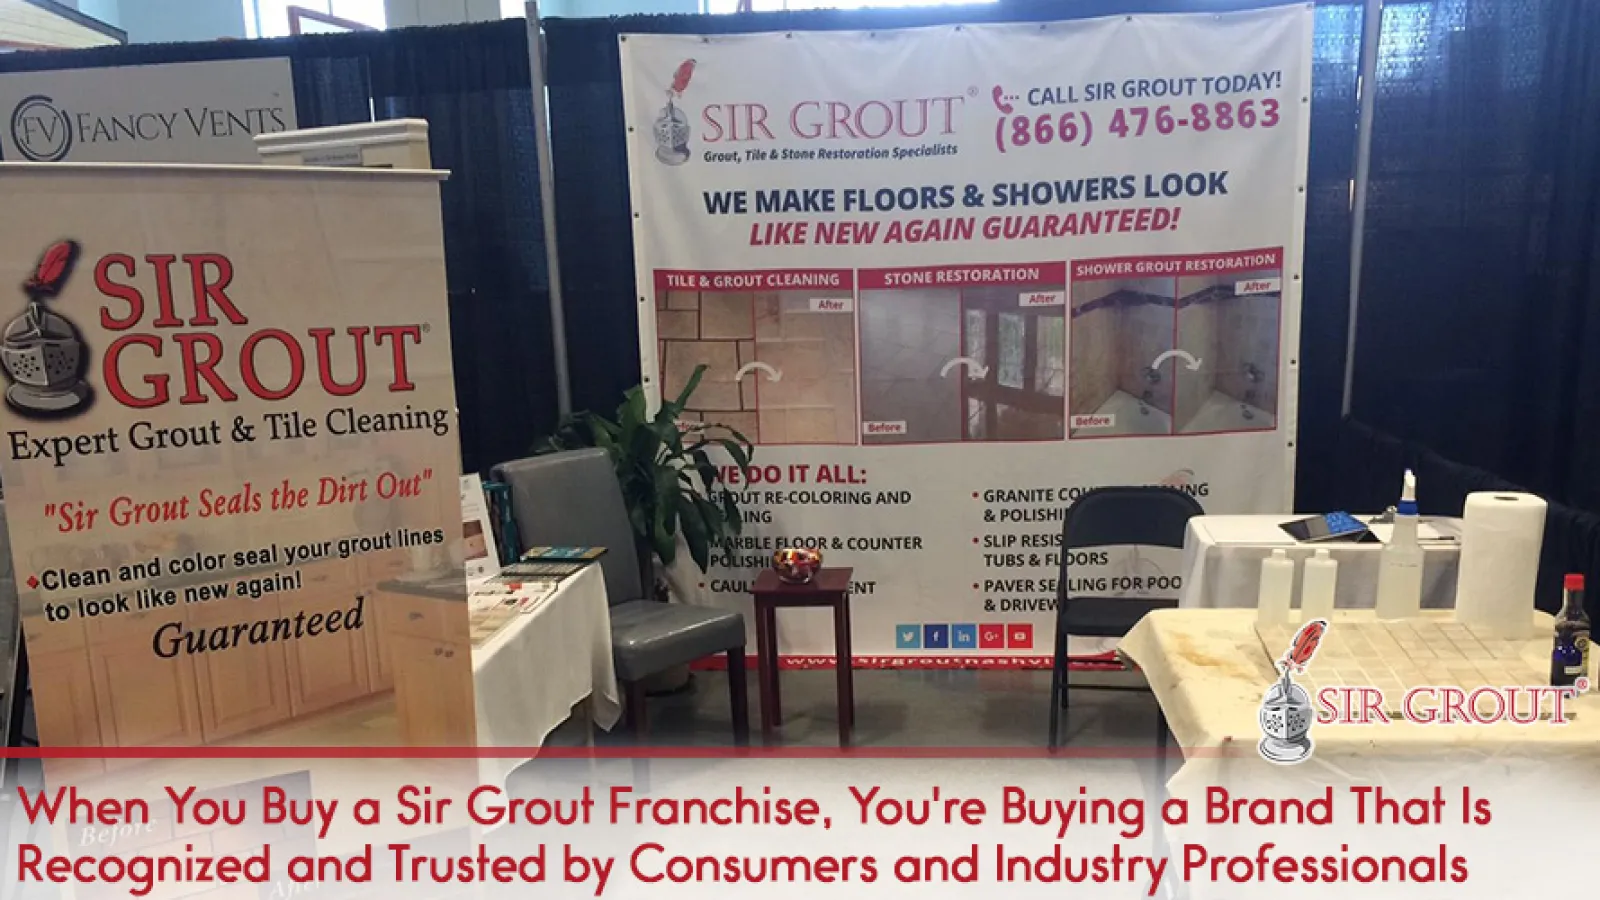 Can You Make a Sir Grout Franchise a Family Business?